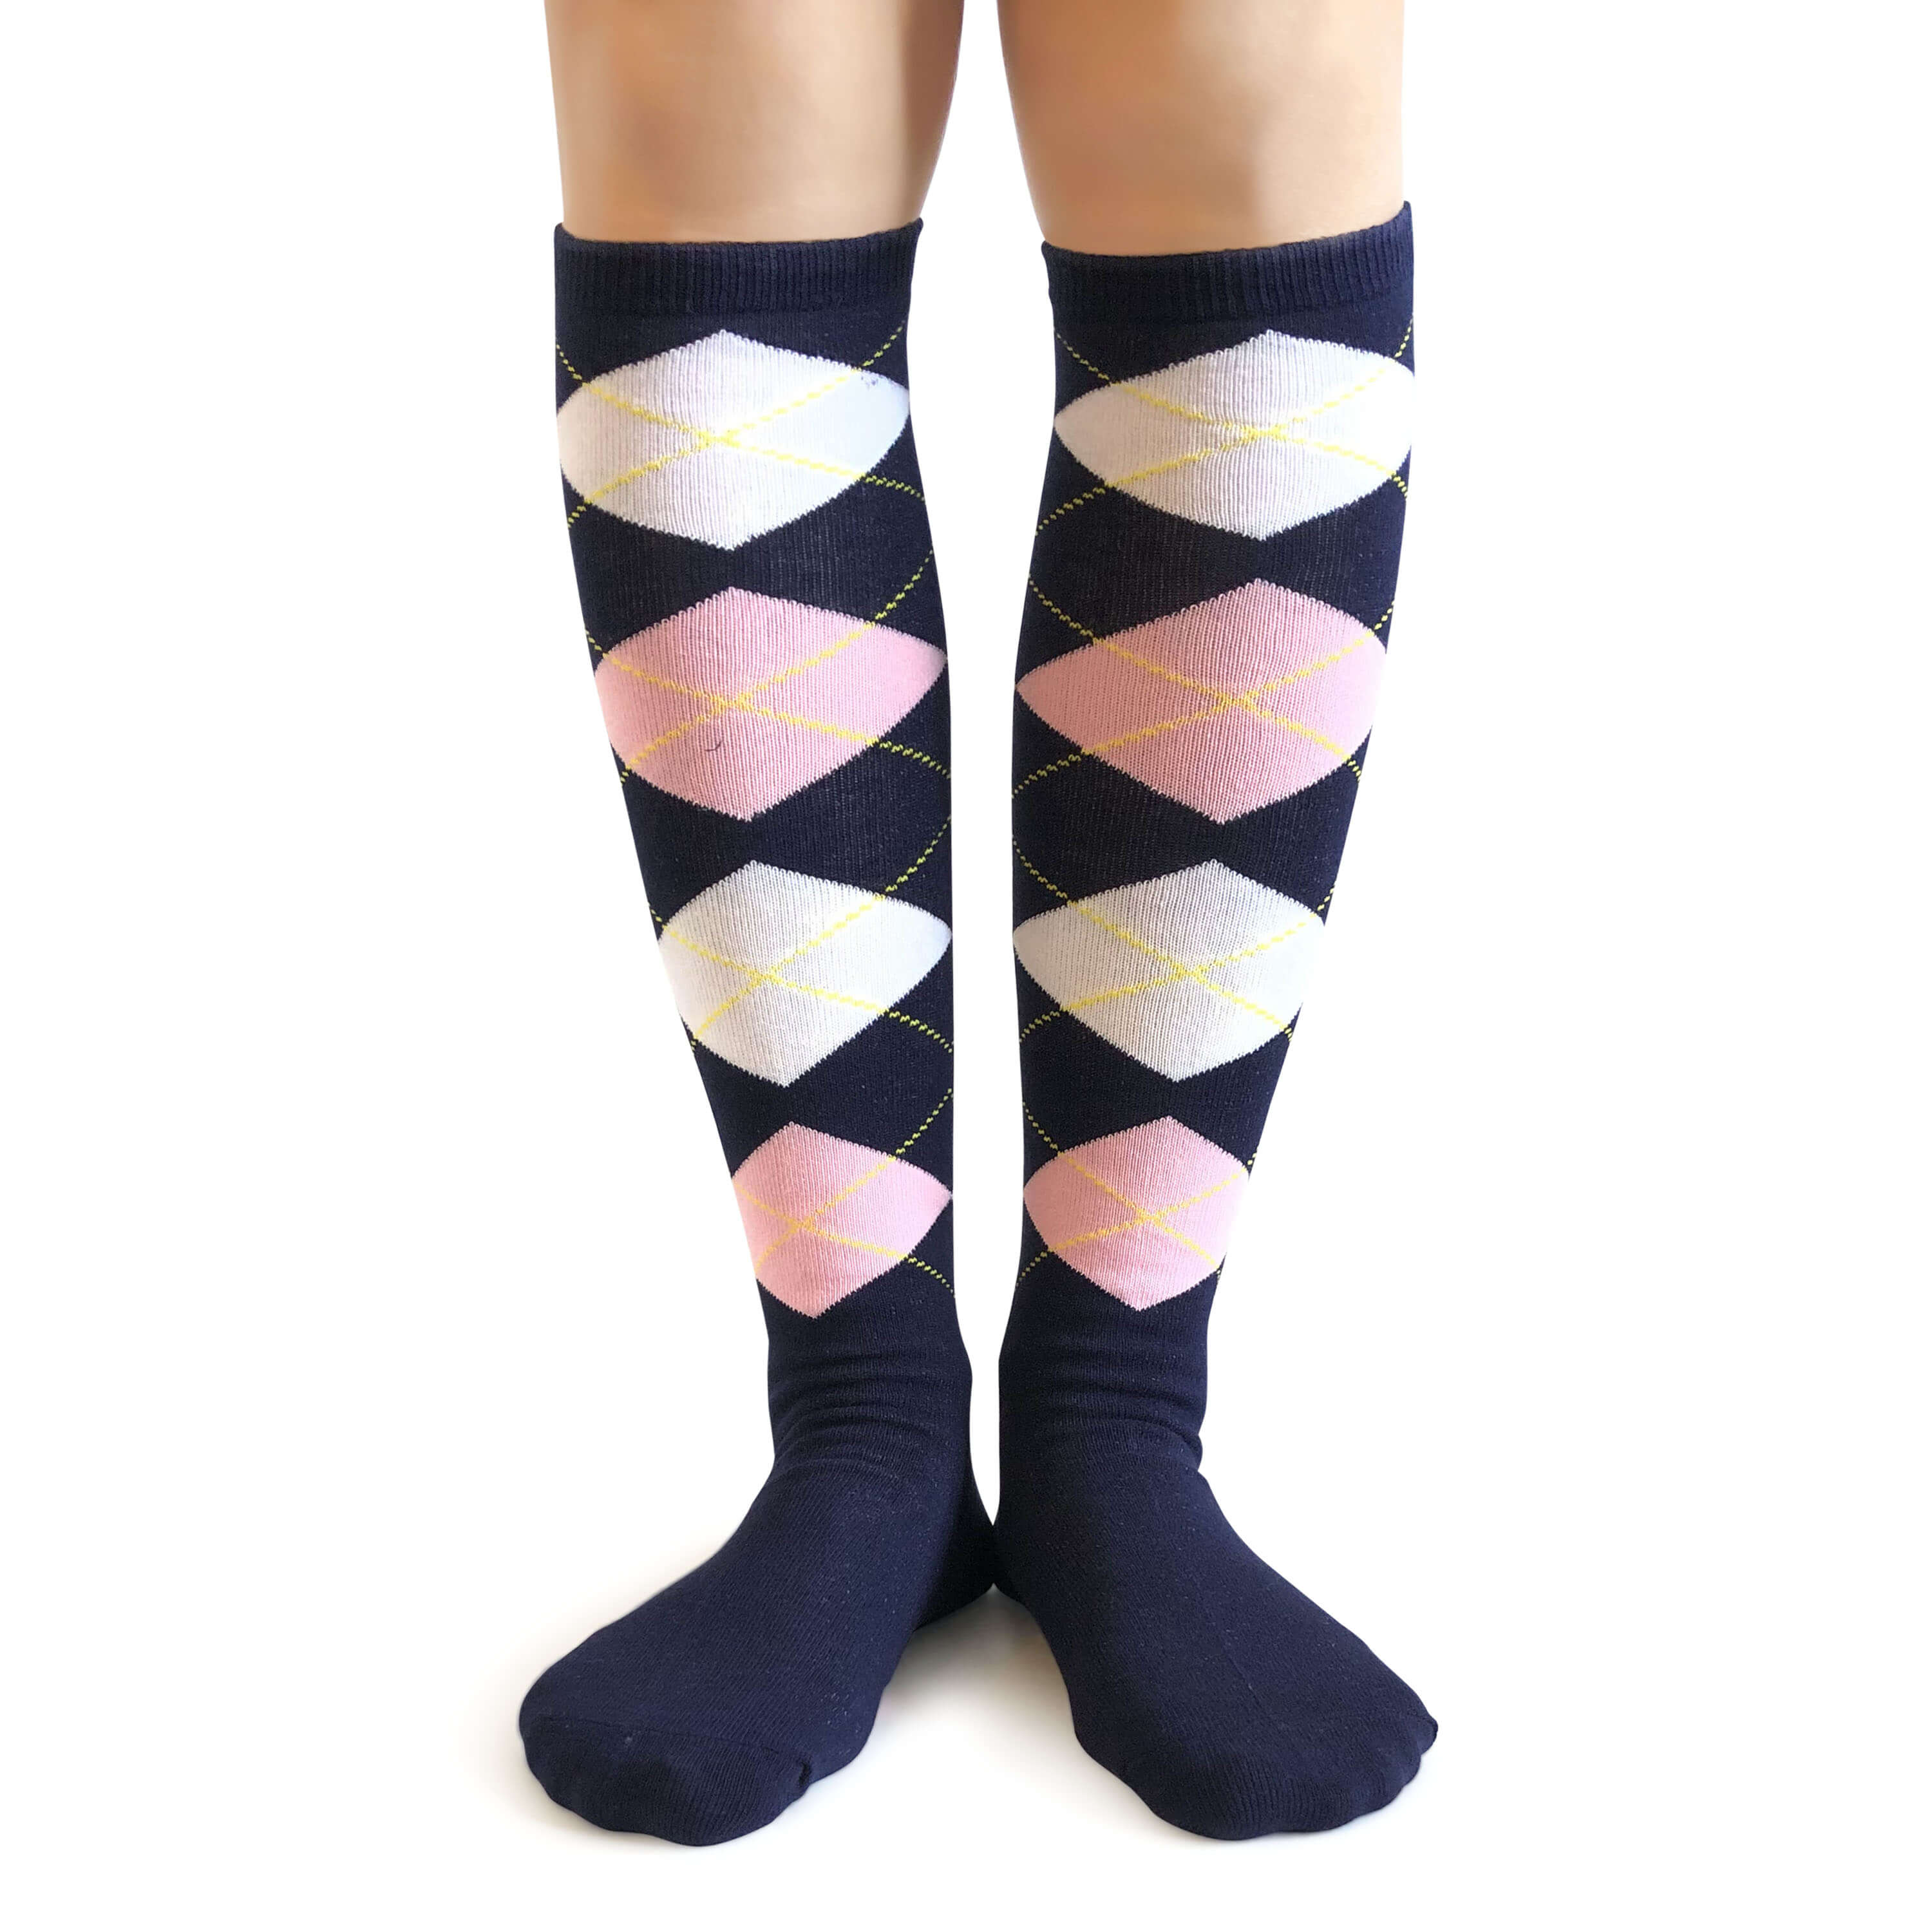 Navy Blue With Light Pink and White Argyle Knee High Socks